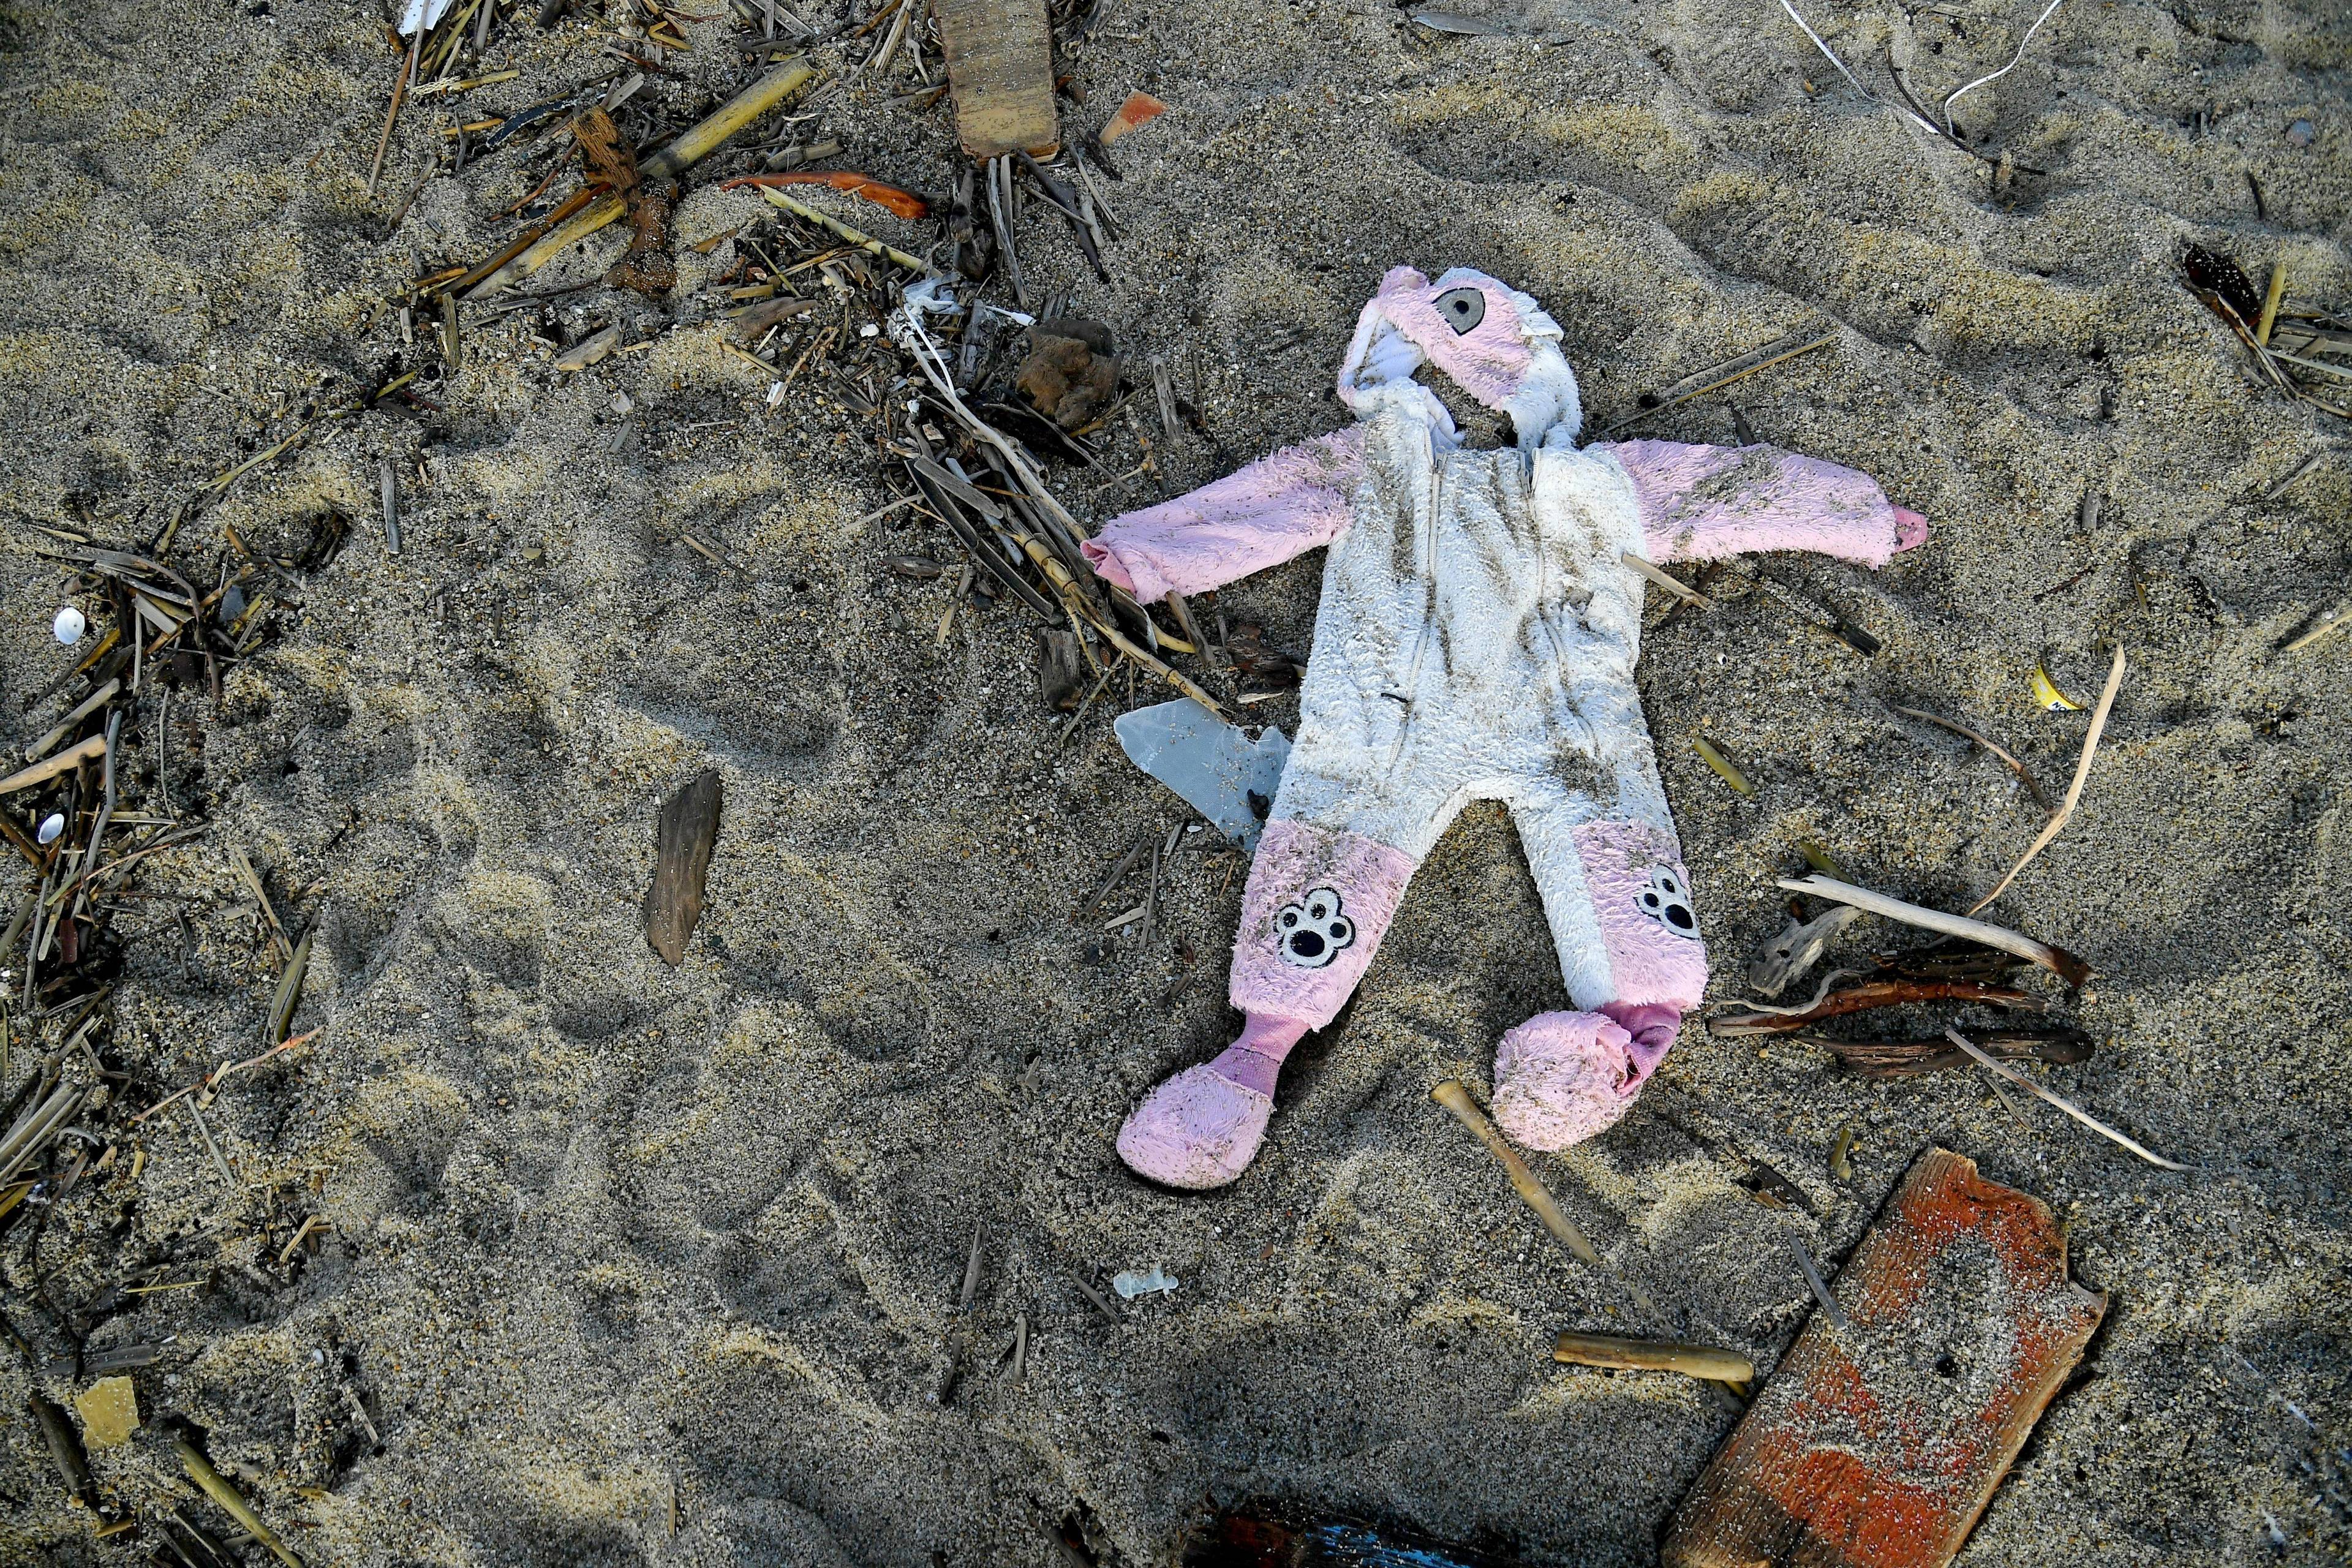 A photograph taken on February 28, 2023 shows a onesie washed up on the beach, two days after a boat of migrants sank off Italy's southern Calabria region, in Steccato di Cutro, south of Crotone. - The overloaded wooden boat broke up and sank early on February 26, 2023 in stormy seas off Italy's southern coast, with bodies, shoes and debris washing up along a long stretch of shoreline. The death toll rose on February 27, 2023 to 62 people, a coast guard official told AFP -- and that number looked likely to increase. (Photo by Alessandro SERRANO / AFP)